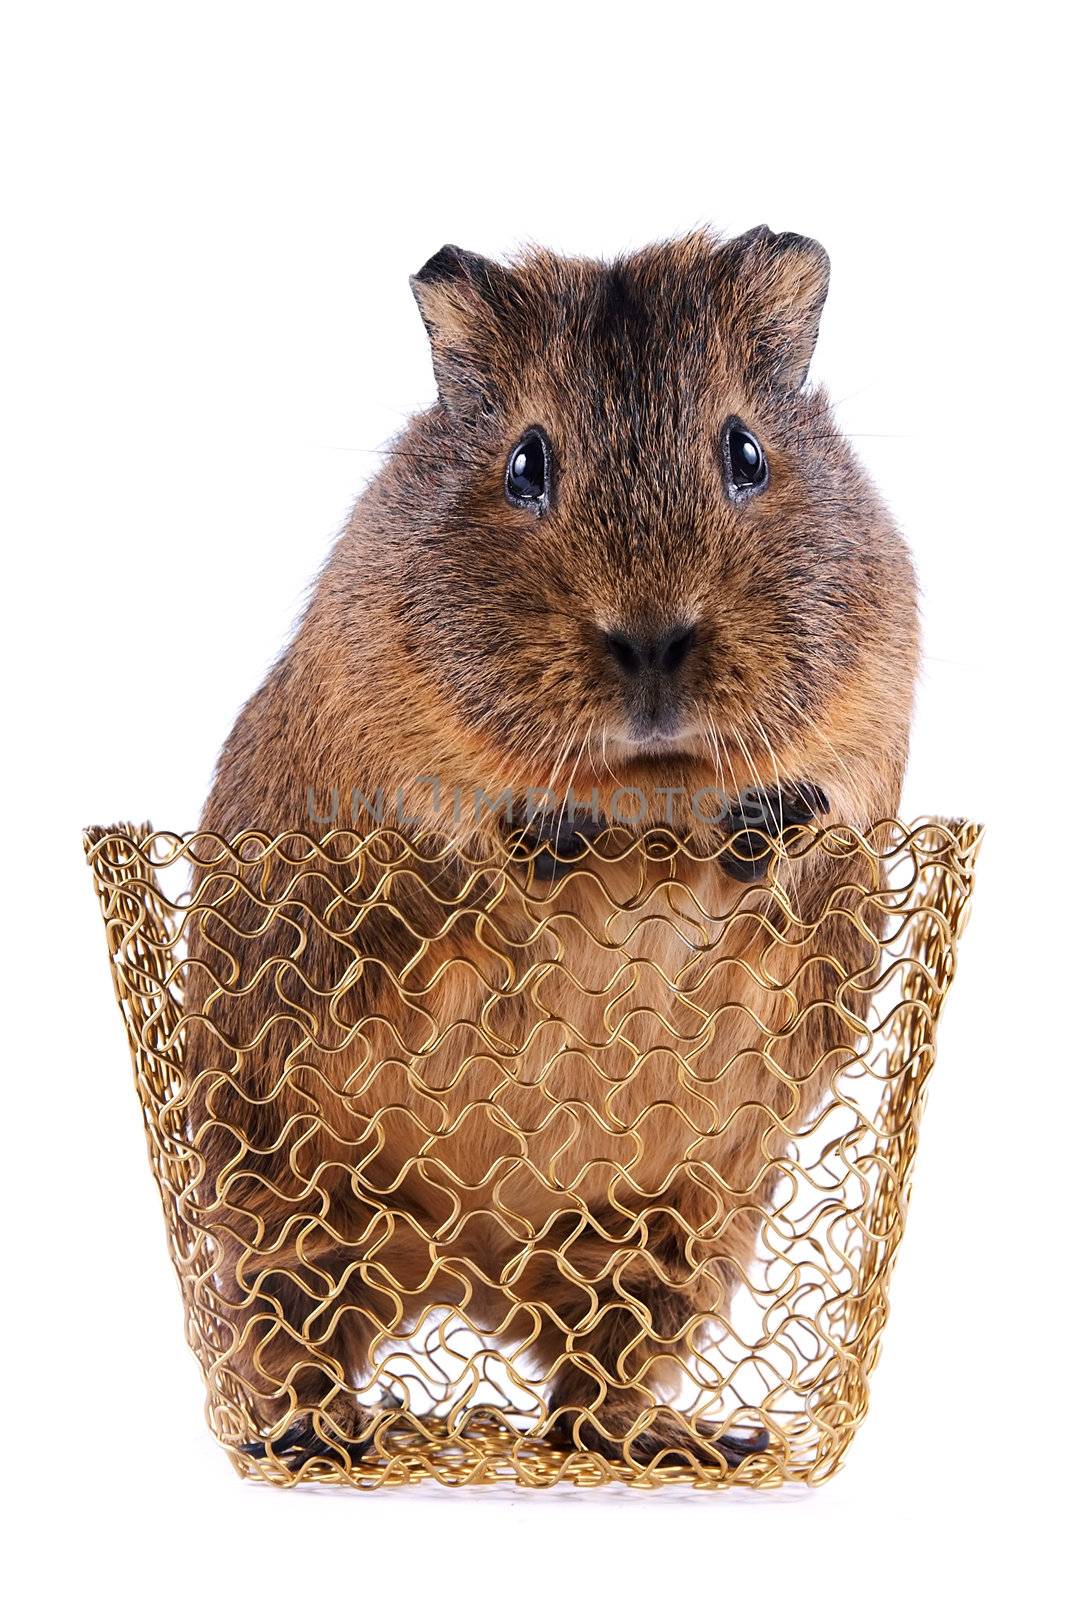 Guinea pig in a gold wattled basket on a white background